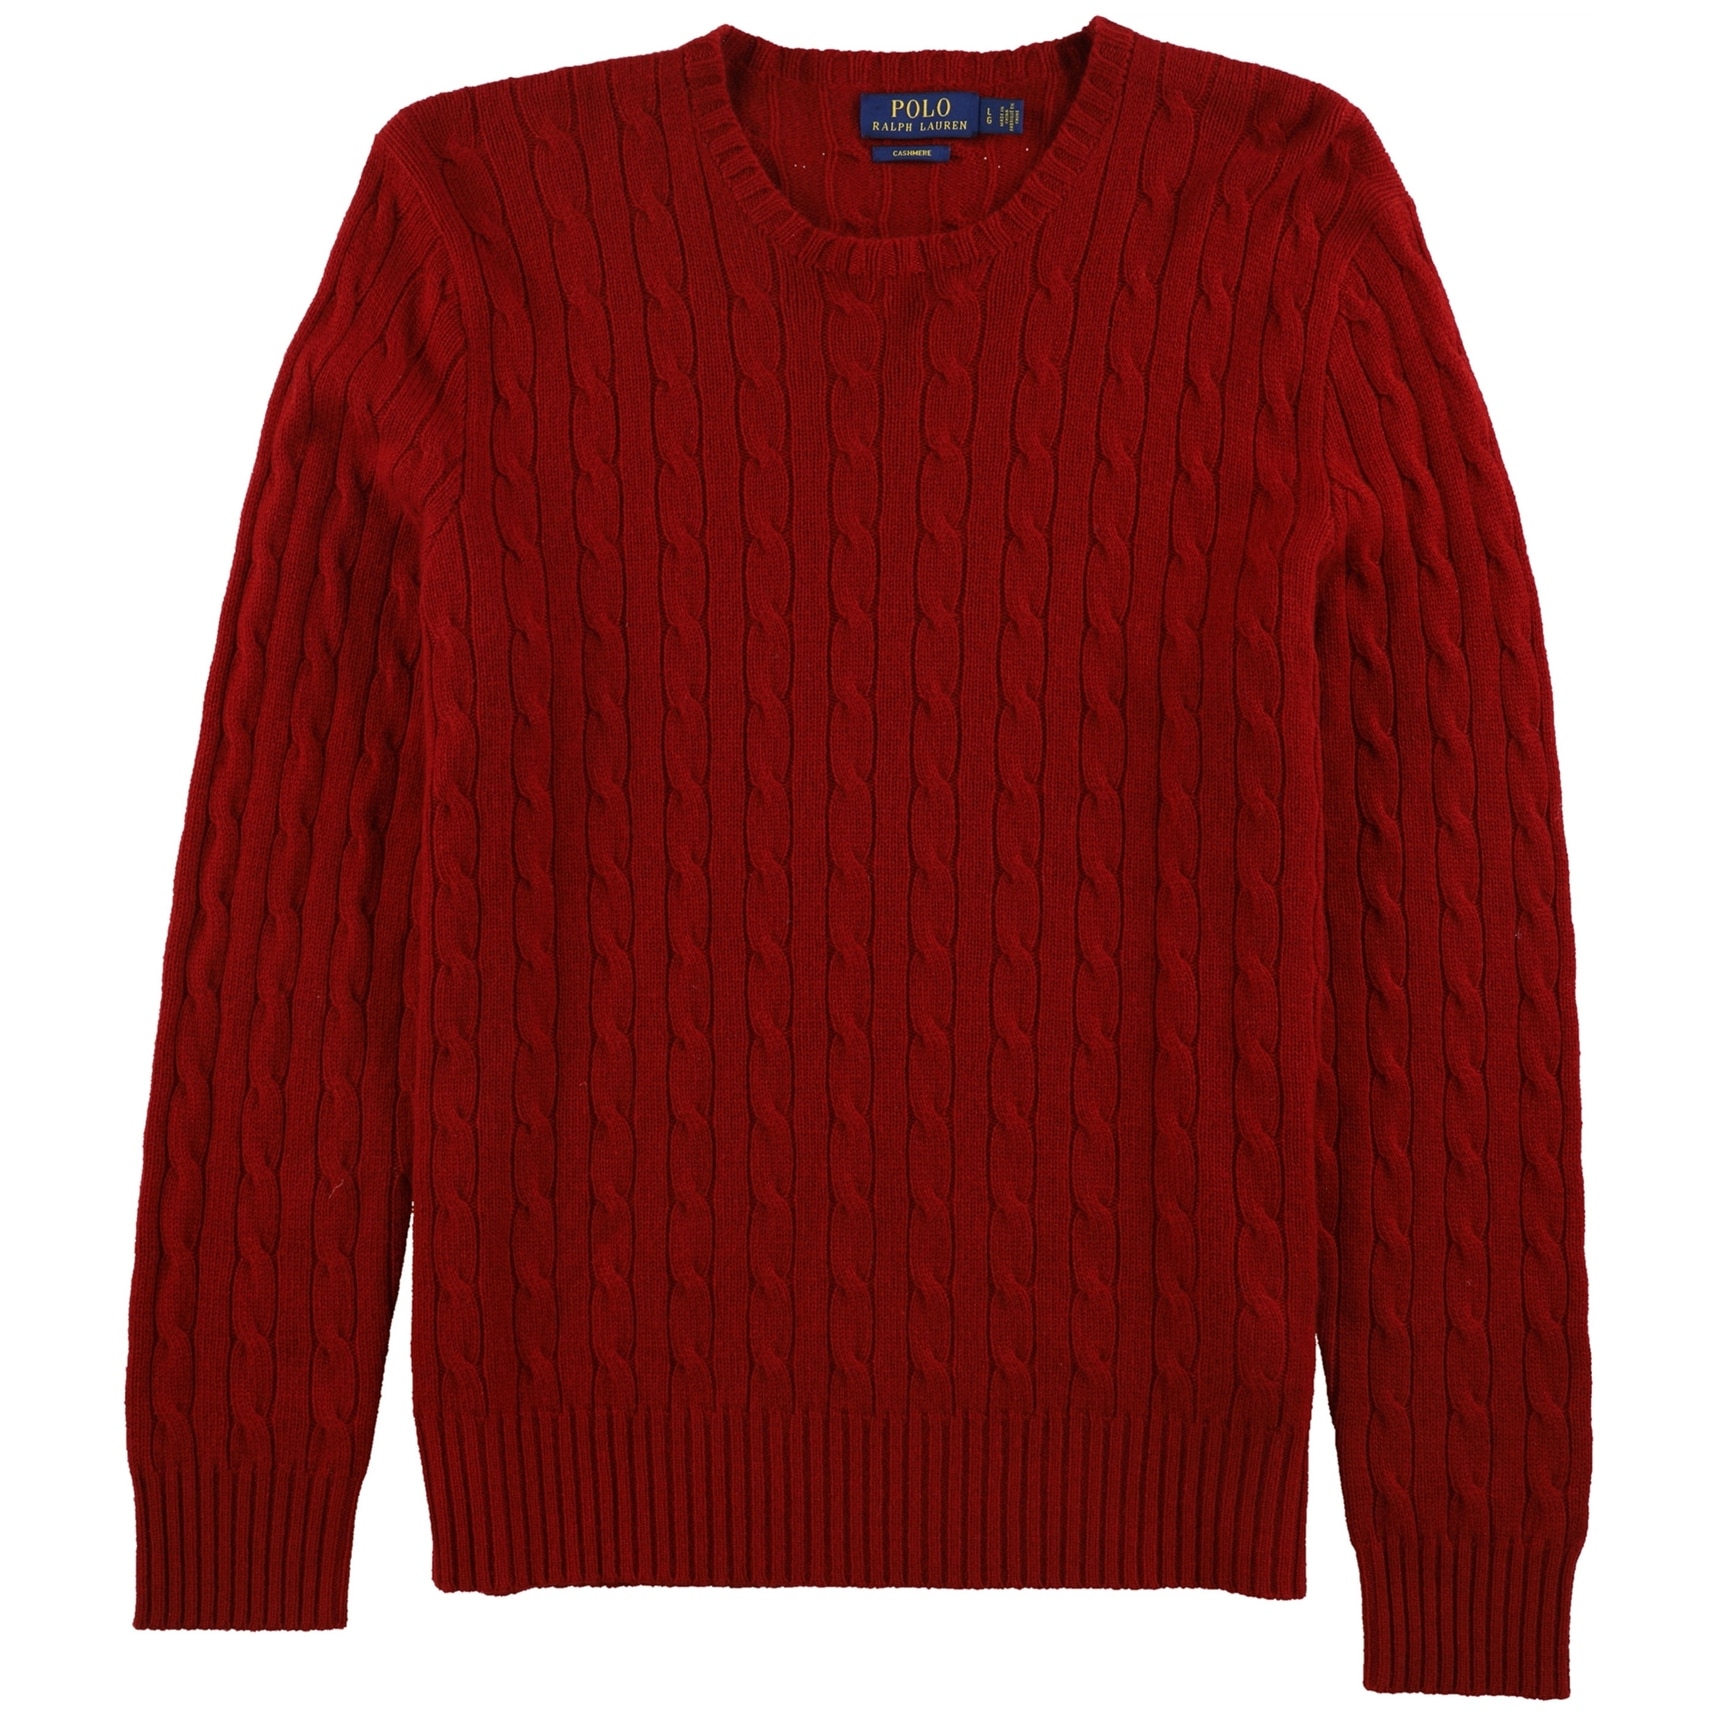 polo ralph lauren cable knit sweater mens